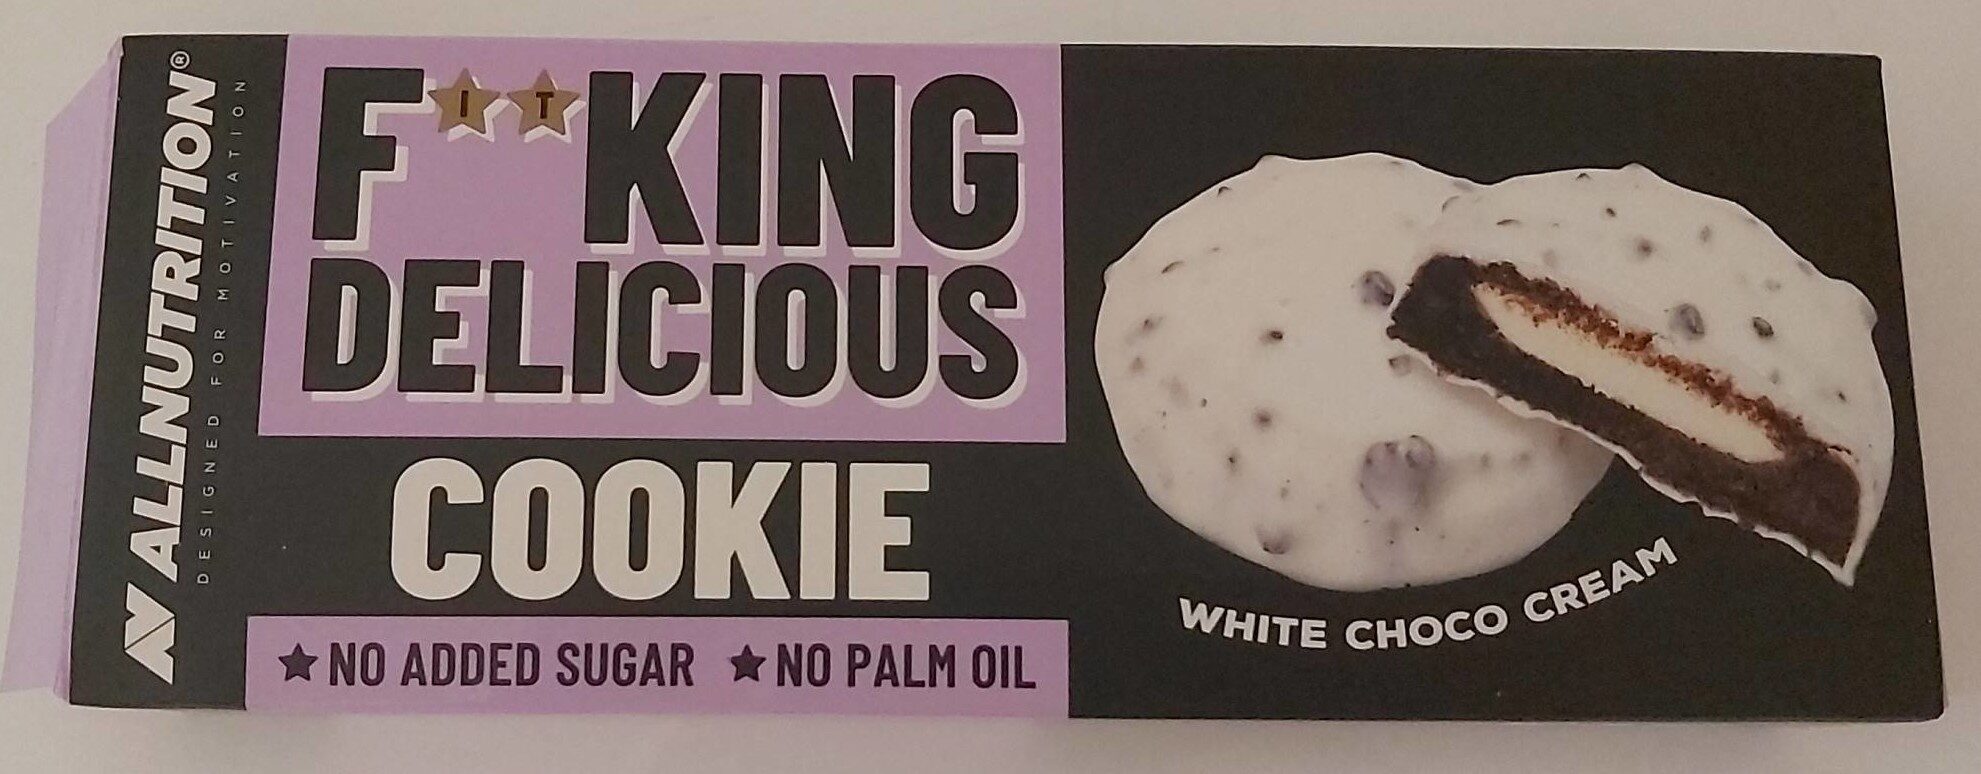 Fitking Delicious Cookie White Choco Cream - Produkt - en